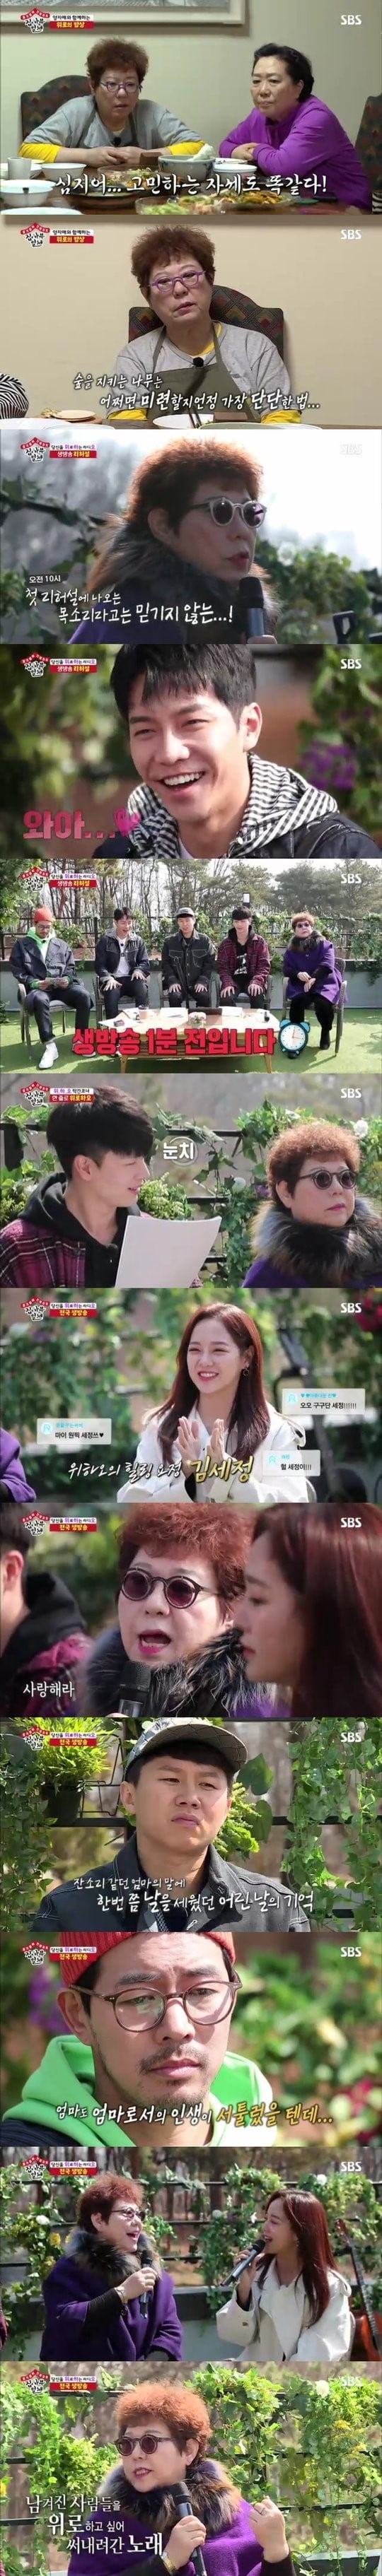 Yang Hee-eun, the voice of comfort, made everyone feel uncomfortable.SBS All The Butlers All aired on the 14th, along with Master Yang Hee-eun, the members of Top Model were portrayed on live radio.Lee Seung-gi, Lee Sang-yoon, Yang Se-hyung, and Yook Sungjae had dinner with the master Yang Hee-eun and Yang Hee-kyung, the brother of Yang Hee-eun.Over dinner, Yang Hee-eun talked about his 49-year song life: The faint tree protects the forest. To the upset, Stay on. Just hold on.Then there is an end, he said.After dinner, Yang Hee-eun announced a surprise mission to the members, saying, Lets do radio.The members were embarrassed by the live broadcast, and Lee Seung-gi said, I have a live-life depression. Yang Hee-eun said, I have been radio since 1971.Its because of the radio that people remember my songs and voices, he said, adding that the media called radio is far more honest than TV, and its much more genuine.The next morning, the members joined Yang Hee-eun on the live broadcast The Radio Comforting You. Unlike Yang Hee-eun, the members were very nervous.Lee Seung-gi, who rehearsed before the start of the live broadcast, said, Today, I am going to play the radio with the concept of up, and the best comfort is likely to be the song of the master. Yang Hee-eun, who responded happily, started to sing love about love on the spot.In a high-quality live by Yang Hee-eun, Yook Sungjae admired, saying, I heard rehearsals and I was comforted.Finally, the live broadcast started, and Lee Sang-yoon started the opening with a comment on the comfort he prepared the day before.Yang Hee-eun and the members then gave advice and comfort to various stories that require comfort, such as I pressed my heart while spying on the Instagram of my first love, I accidentally ate the food of my guest while working part-time, and I enlist my son.Yook Sungjae, who accidentally broke Yang Hee-euns eyeglass line in the last broadcast, confessed that through a radio story.Yang Hee-eun, who noticed the facts at once, said, Its okay, its not important, and said, It will be restored at any time.However, Hold me once laughed at Yook Sungjae, saying Why and refused chicly.On the other hand, Yang Hee-eun invited a special guest to clean the old club, which introduced the story of worrying about his mother who started a new job at a late age.Yang Hee-eun suggested that she spend a small time with her mother, saying, What she can do is to take a bath on the weekend or take a walk together.Yang Hee-eun, who talked about the members and mother, said, I have no baby with two cancer surgeries, so I probably do not know.I do not think I will be able to grow up, he said. But one thing is certain that I can sing and broadcast in the morning because my mother gave me a strong birth.I also thank my mother for being healthy until she is ninety years old. Yang Hee-eun then made the hearts of those who were enthusiastic about Mom to Daughter with cleaning.Lee Sang-yoon, with his eyes reddened, said, I thought my mother would be there for a long time, but recently at a family meeting, I saw a long future and talked about it, and my parents said, It is a few years at best that we think about you and we are together.I never thought about it. Yang Hee-eun said, I always think, how much time do I have to spend with my mother?How empty is it when there is no fence you can call Mom, so lets not be upset after you leave and express it now, he said with heartfelt advice.Yang Hee-eun said, The beginning of my song was comforting.I sang to comfort me, he said, saying that at the young age of thirteen, my father died and started singing to fill his empty heart.Finally, Yang Hee-eun said, I want you to play this song when I die.I hope this song will remain and go around the world. He wrote a song Even after I left , which he wrote to comfort the people left behind.